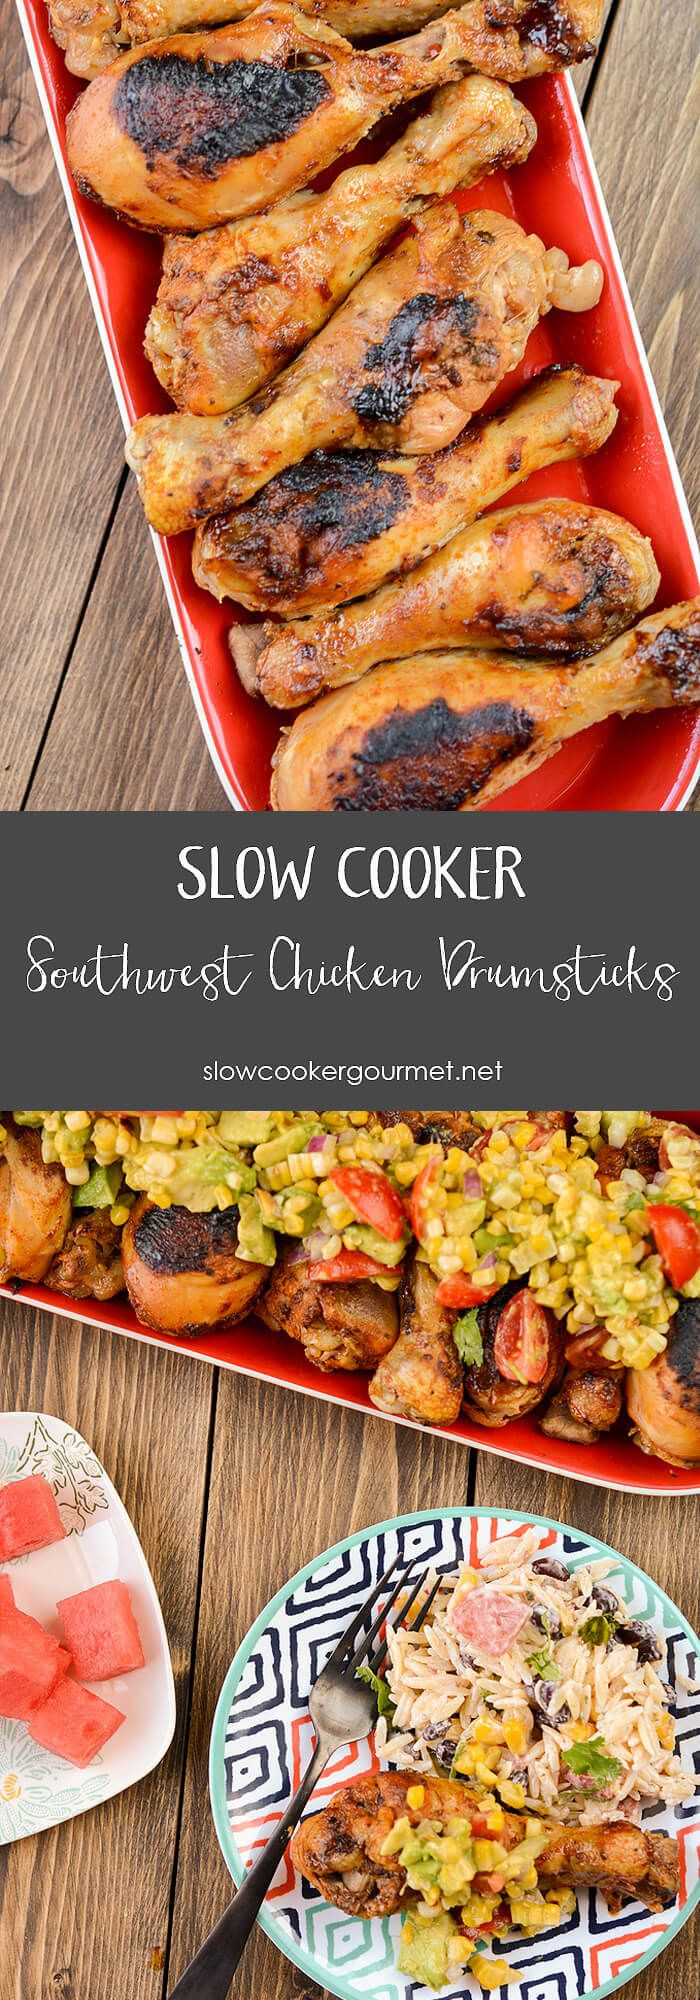 Healthy Chicken Drumstick Slow Cooker Recipes
 Slow Cooker Southwest Chicken Drumsticks